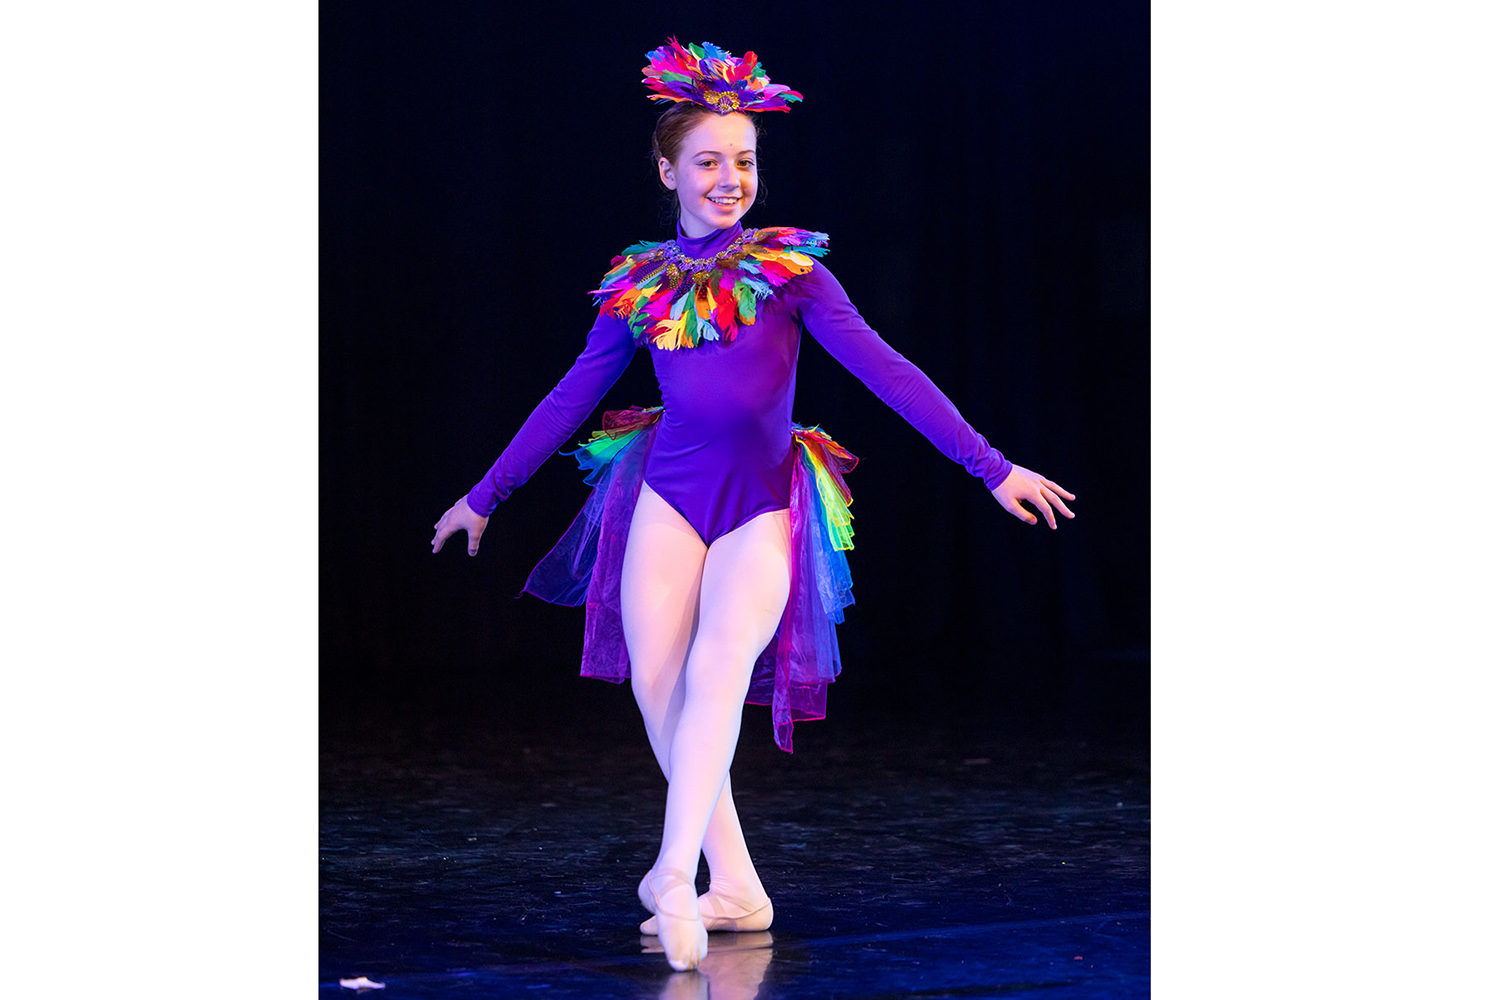 St Andrew's College student Holly Thirkell ballet dancing.